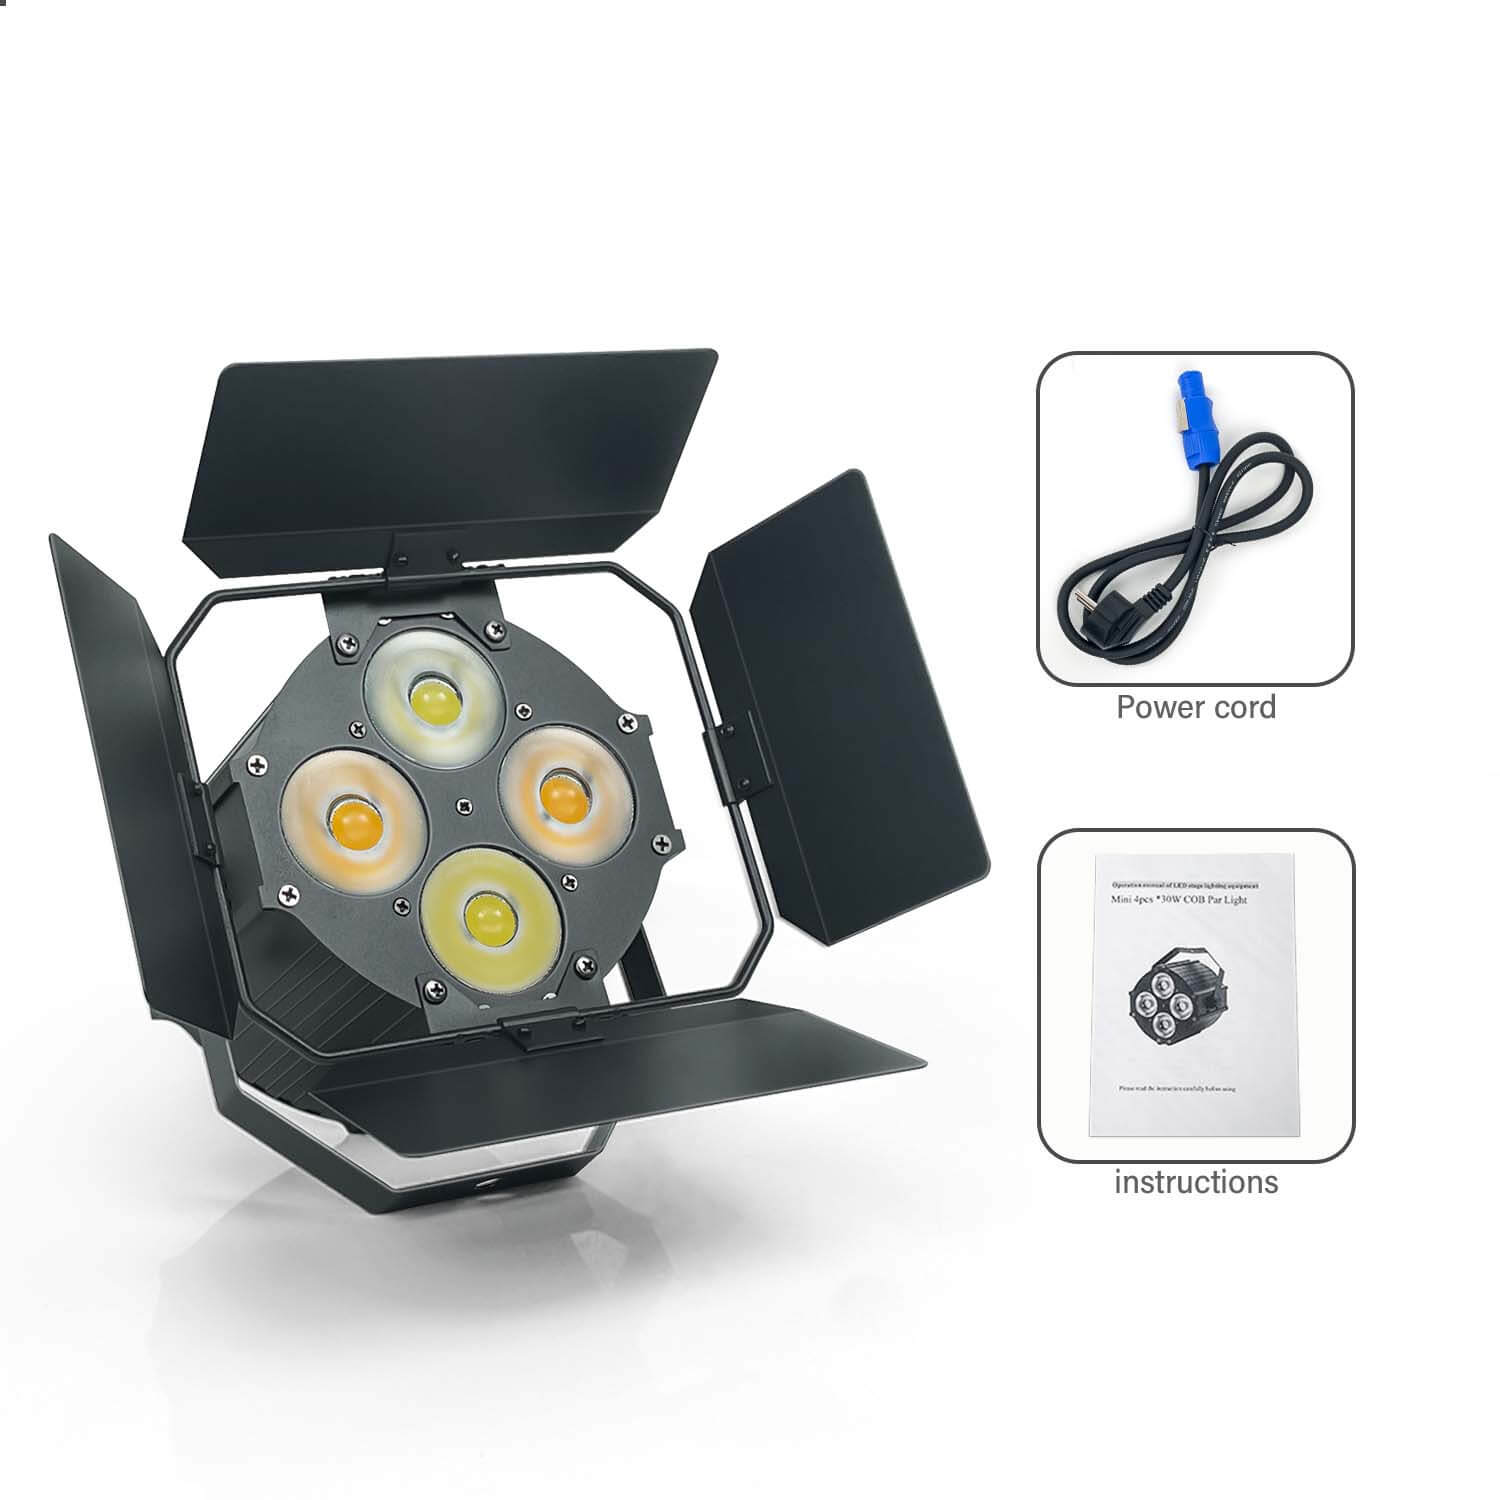 4X30W WW and CW COB 2IN1 Par Light with Barn Doors